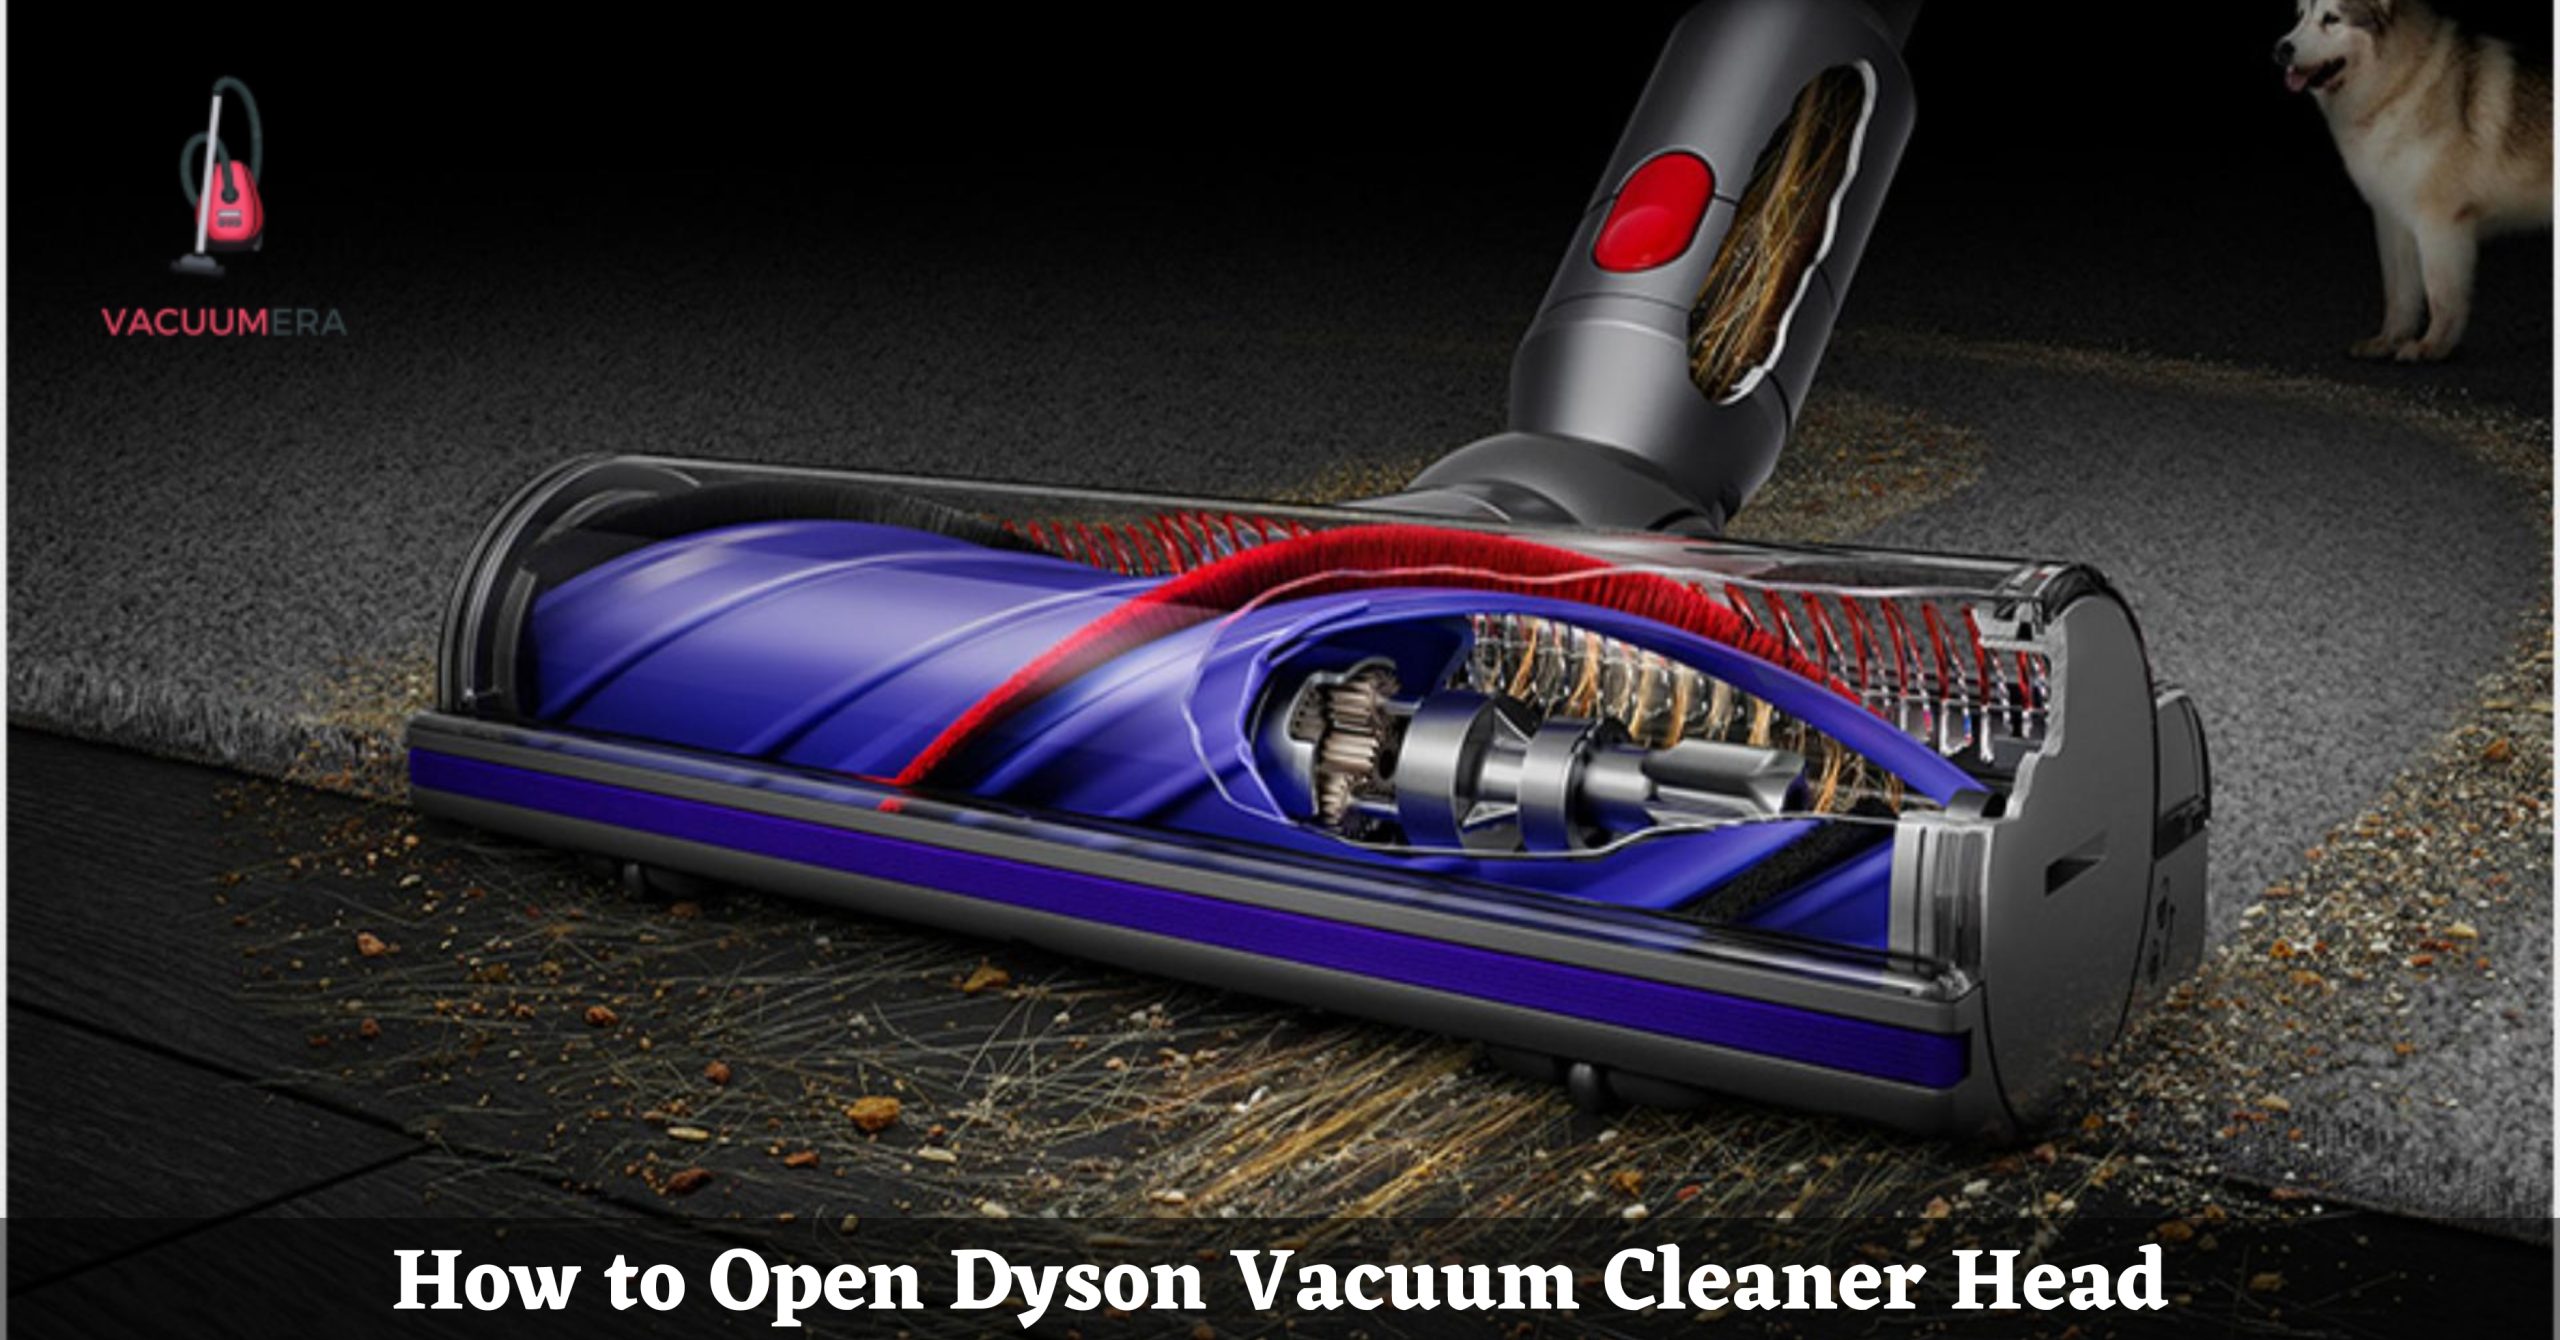 How to Open Dyson Vacuum Cleaner Head